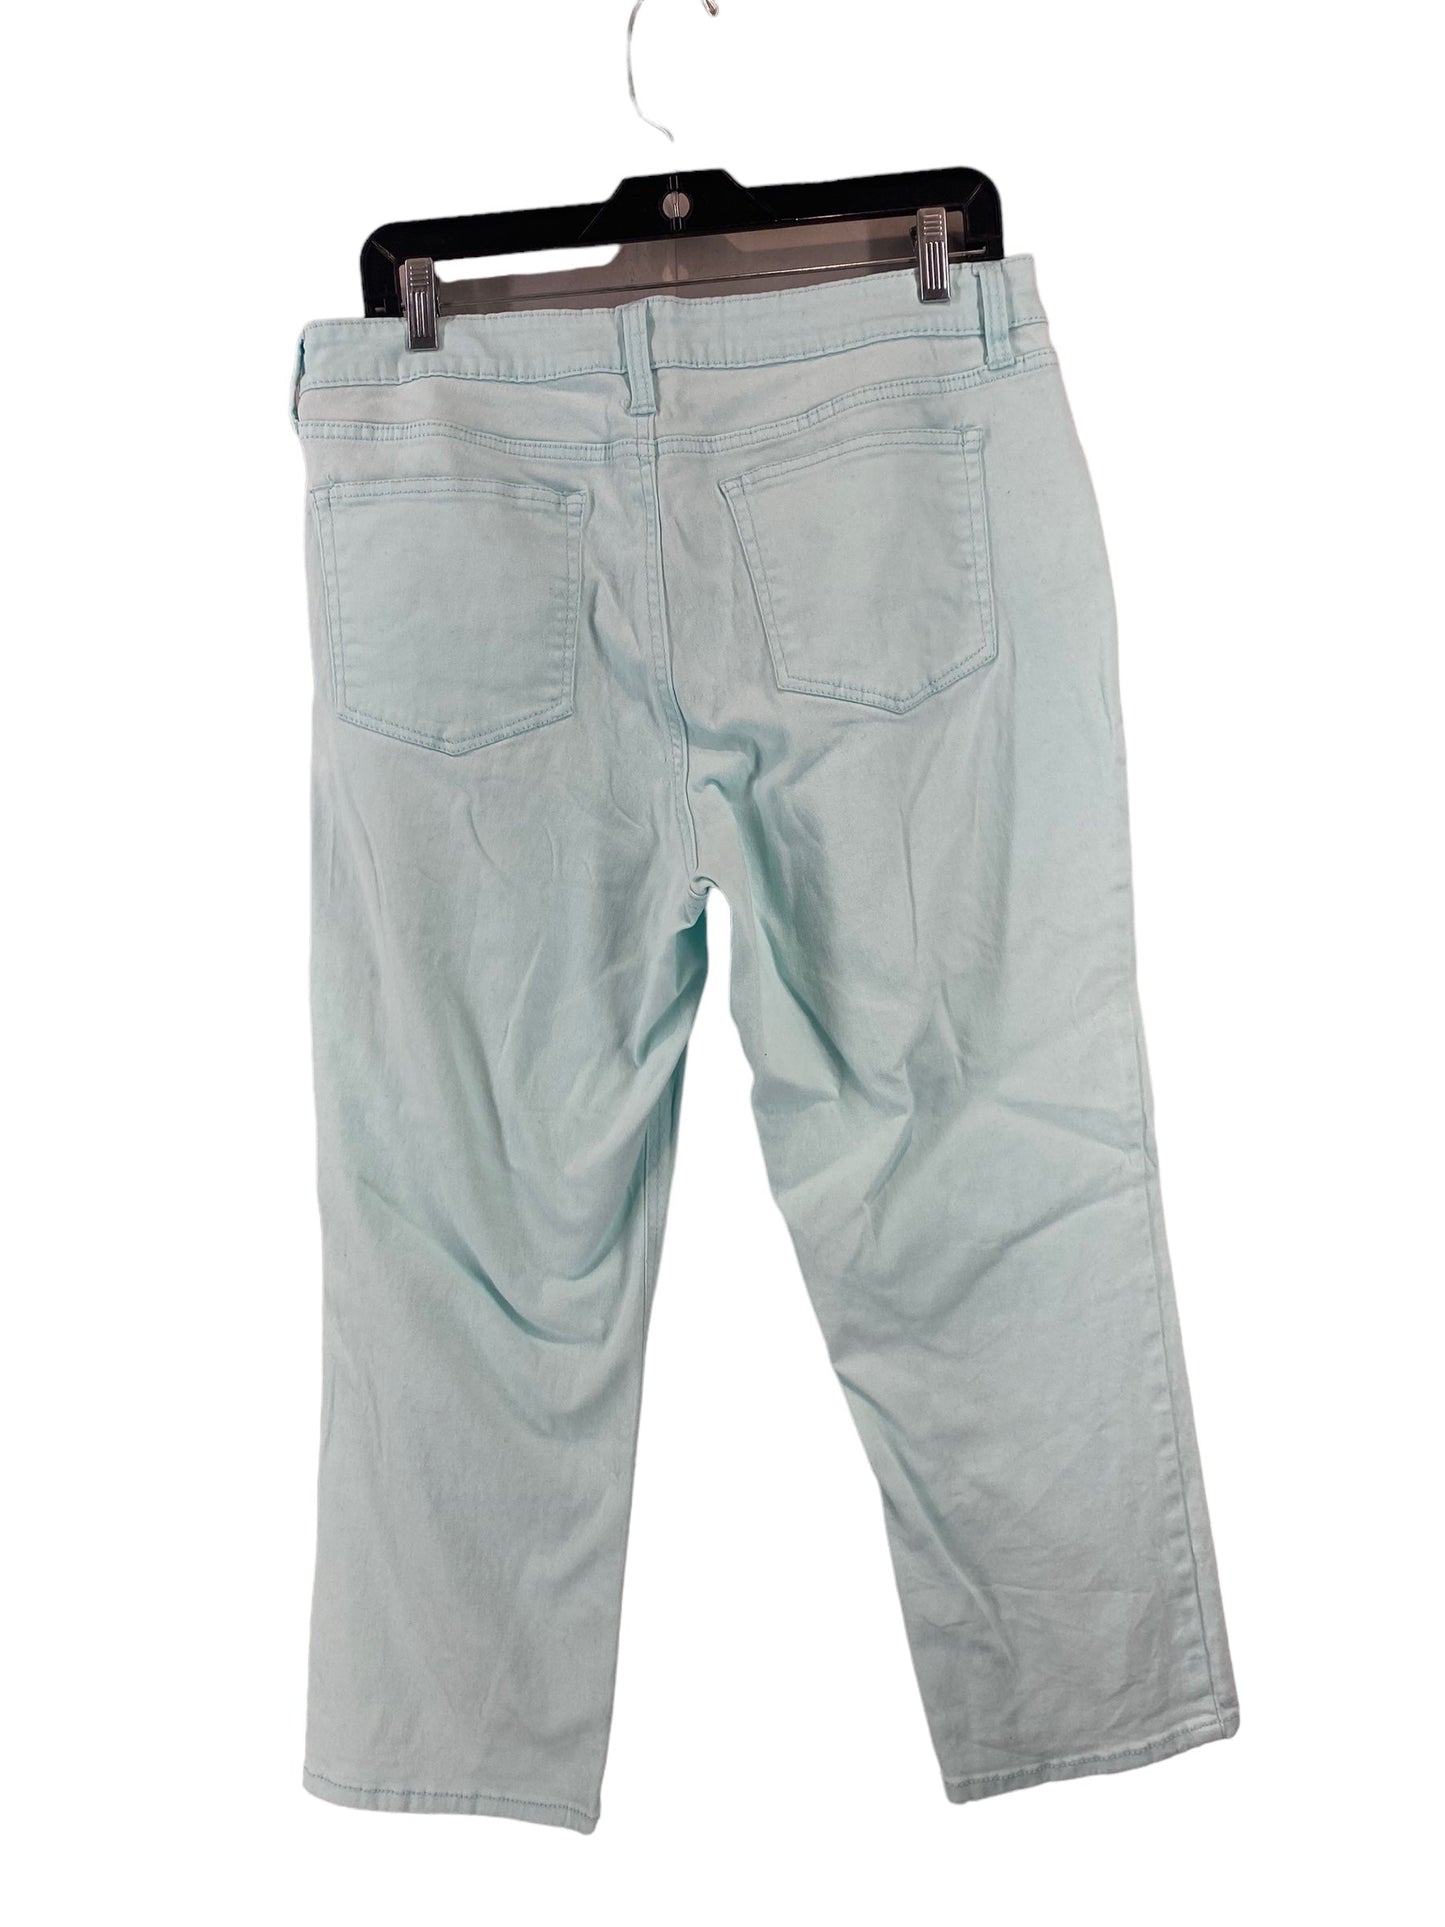 Capris By New Directions  Size: 14